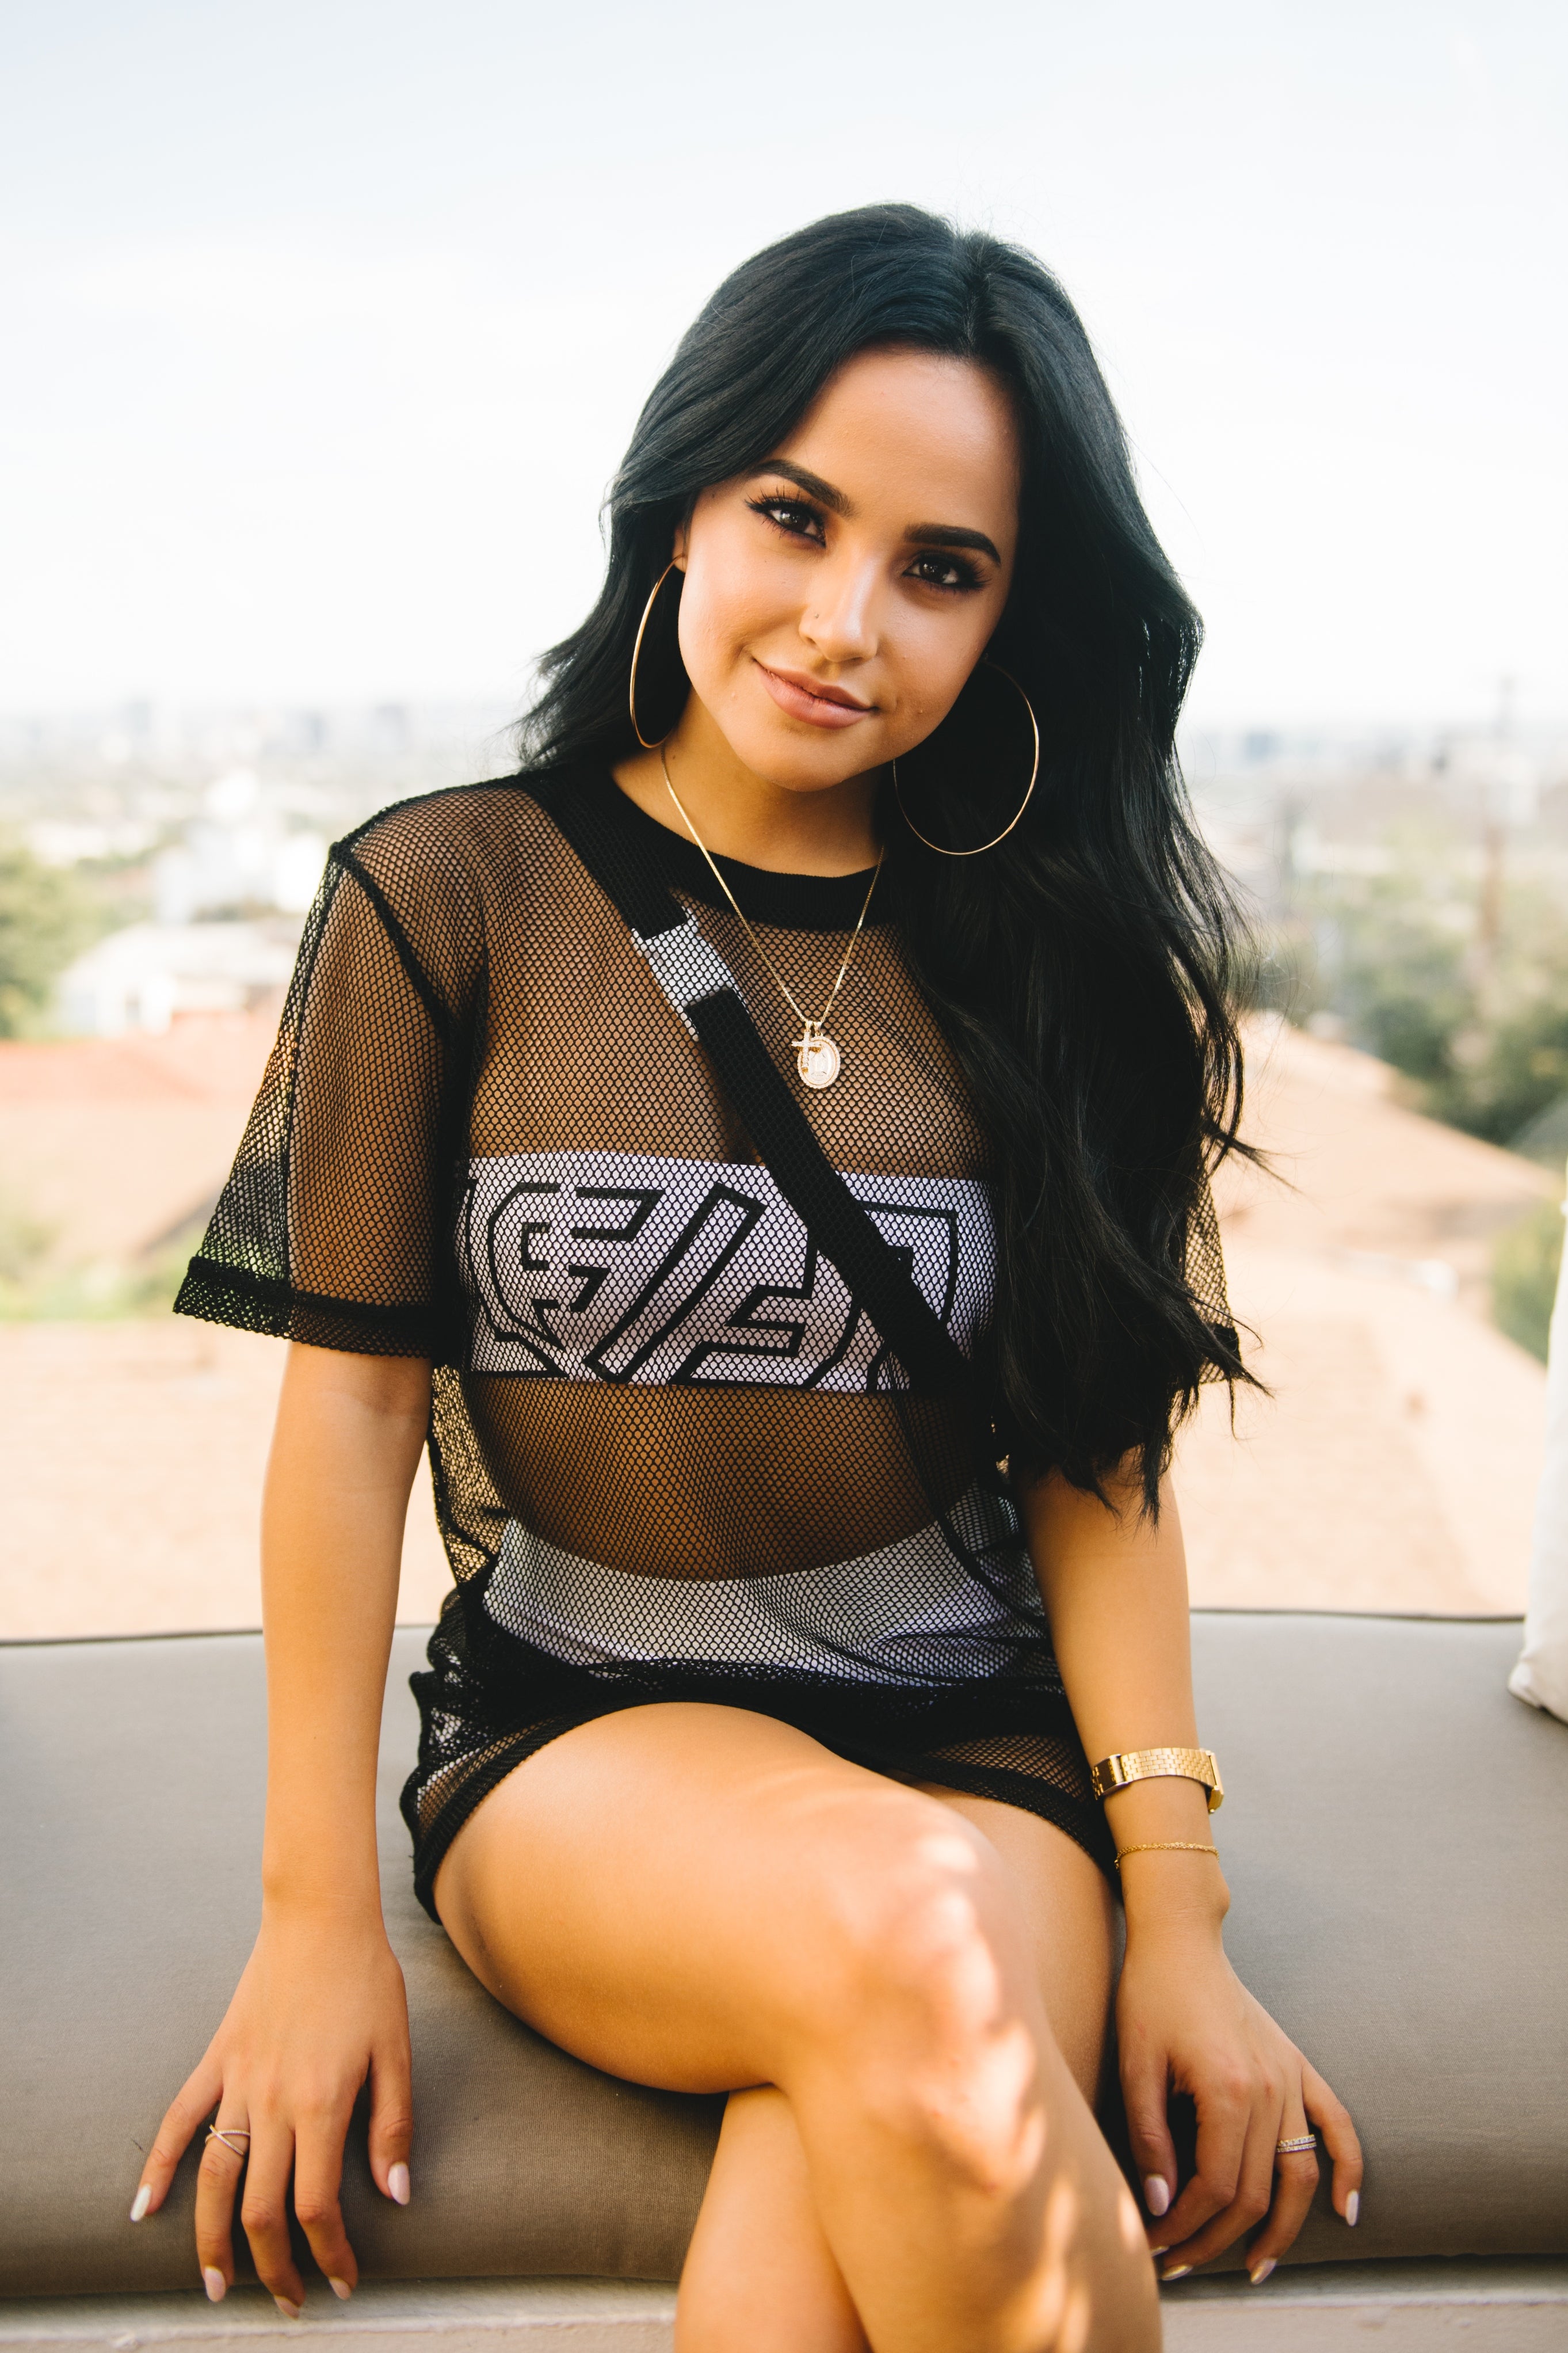 Sexy pics of becky g